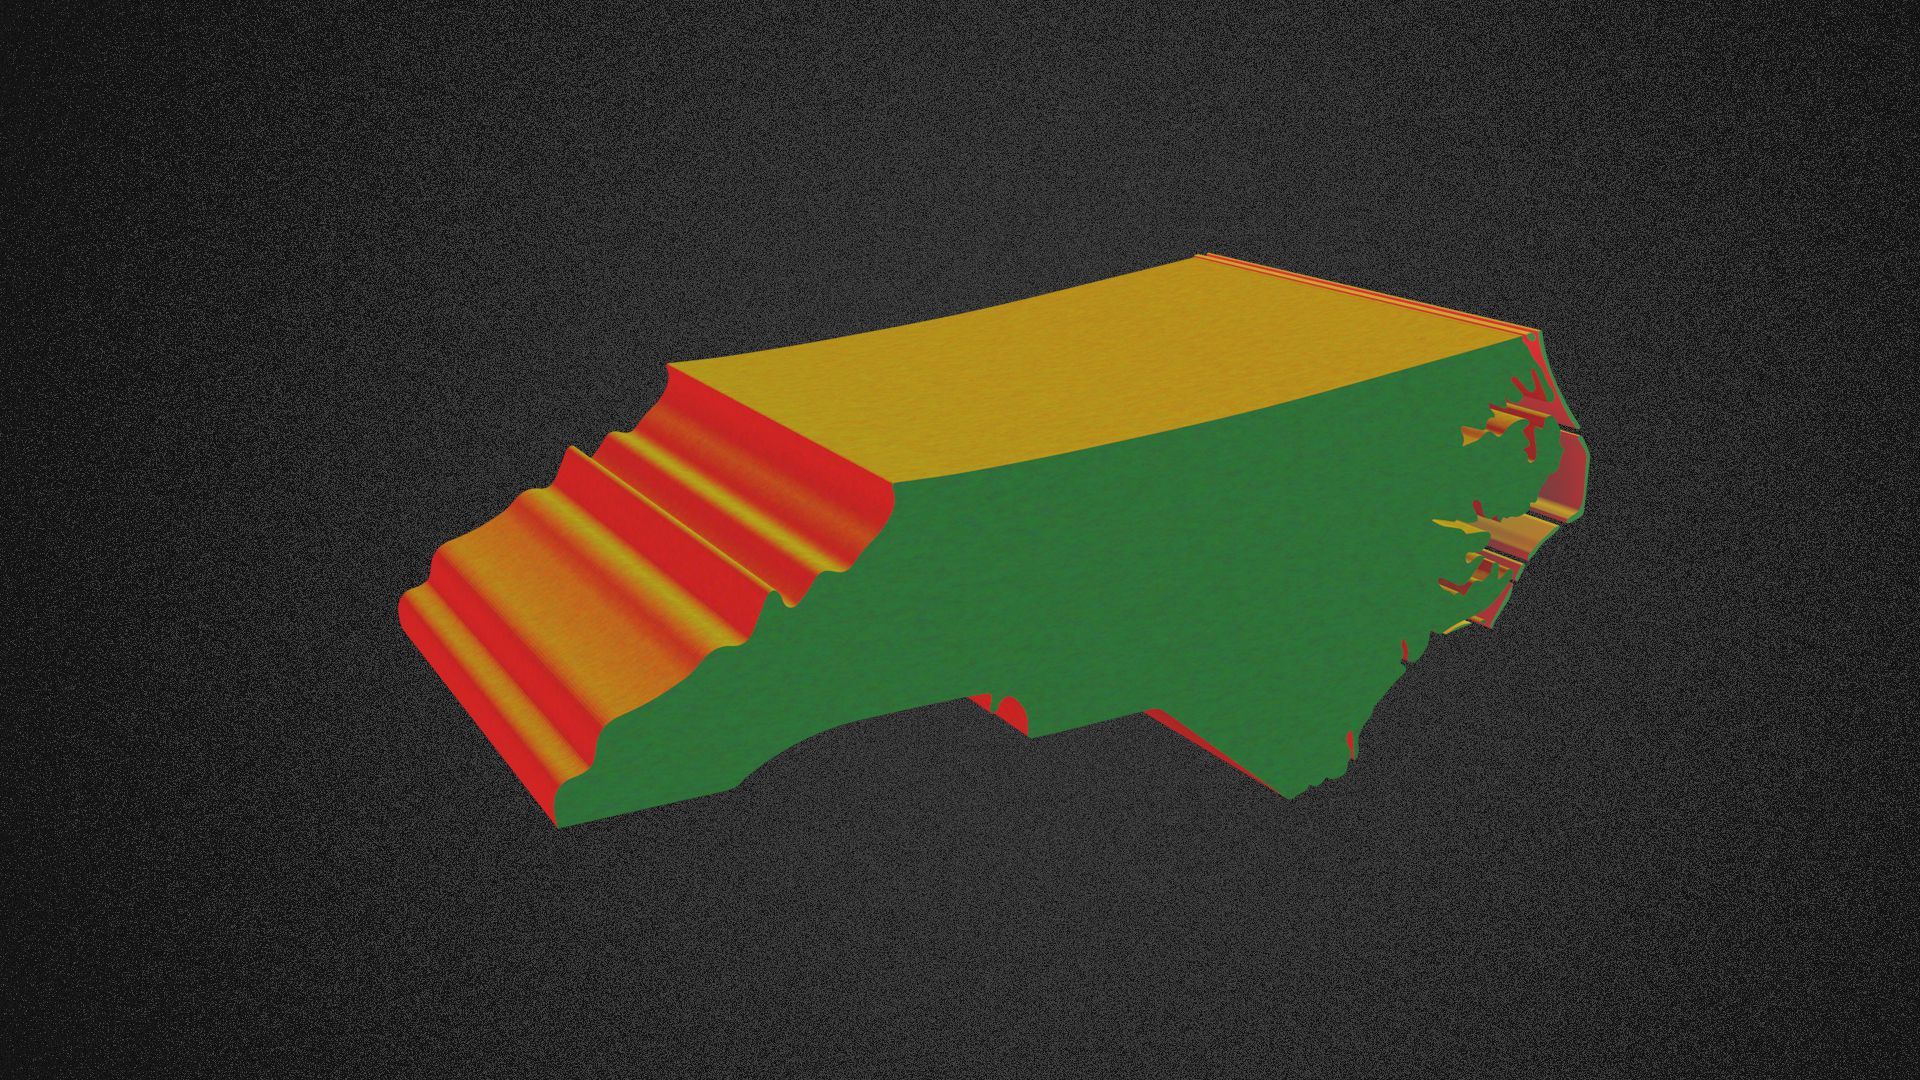 Illustration of the state of North Carolina lit by red, green and yellow lights.